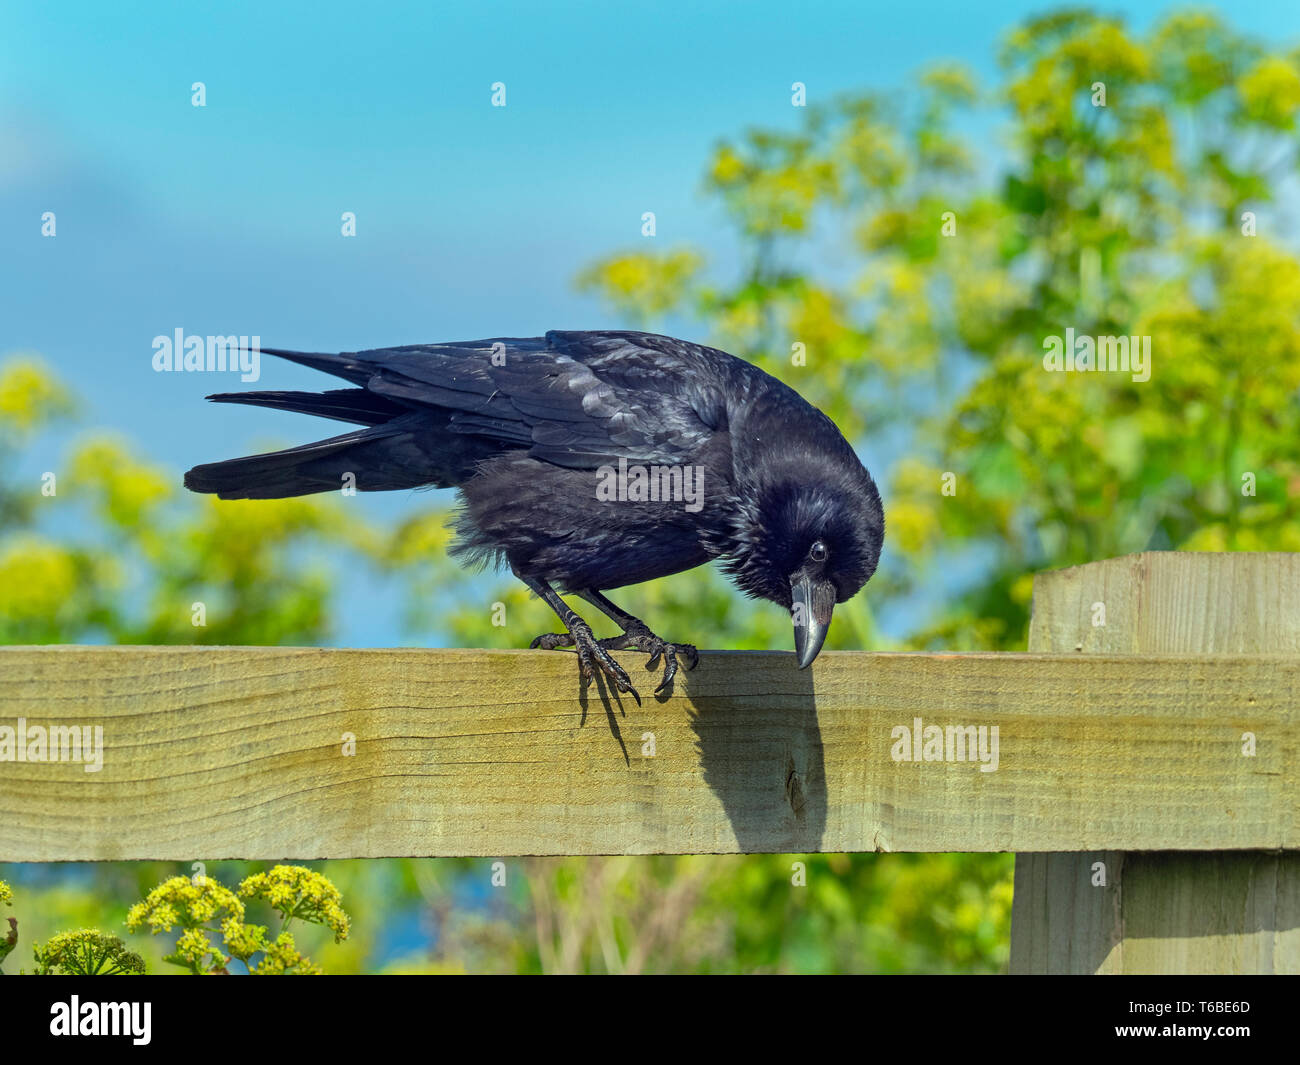 Carrion Crow Corvus corone perched on field fence Stock Photo